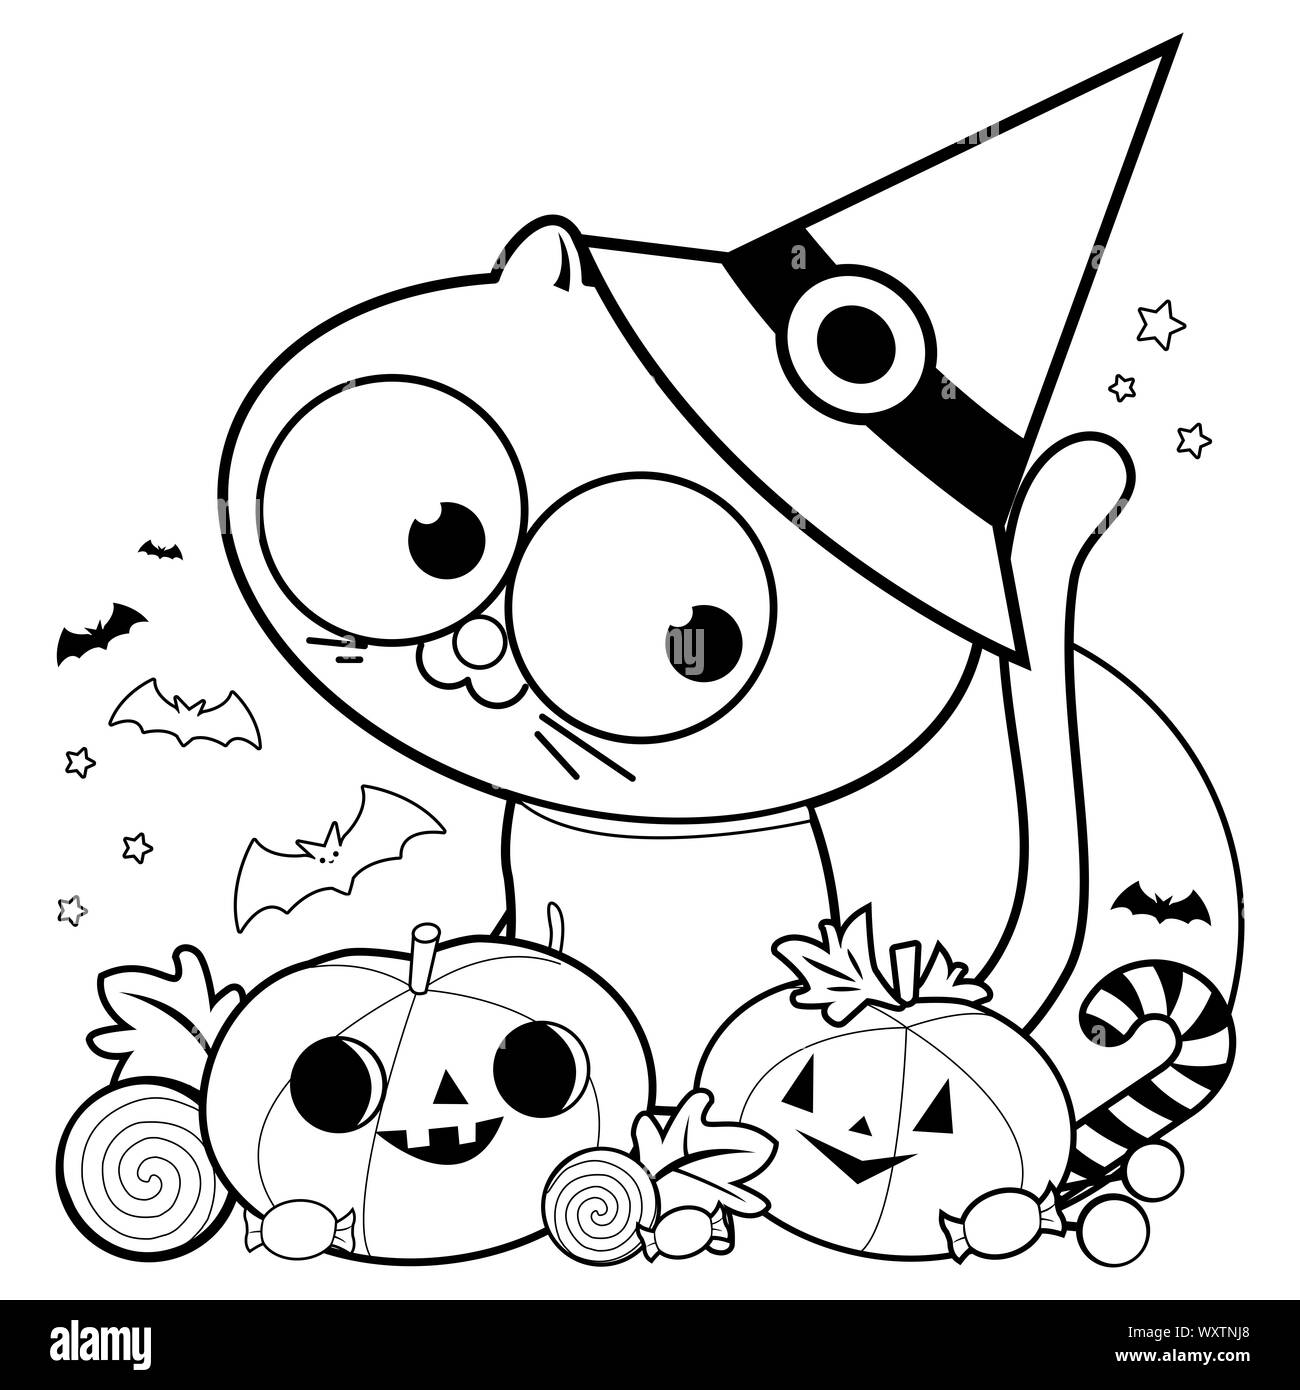 Halloween cat, pumpkins and treats. Black and white coloring book page Stock Photo